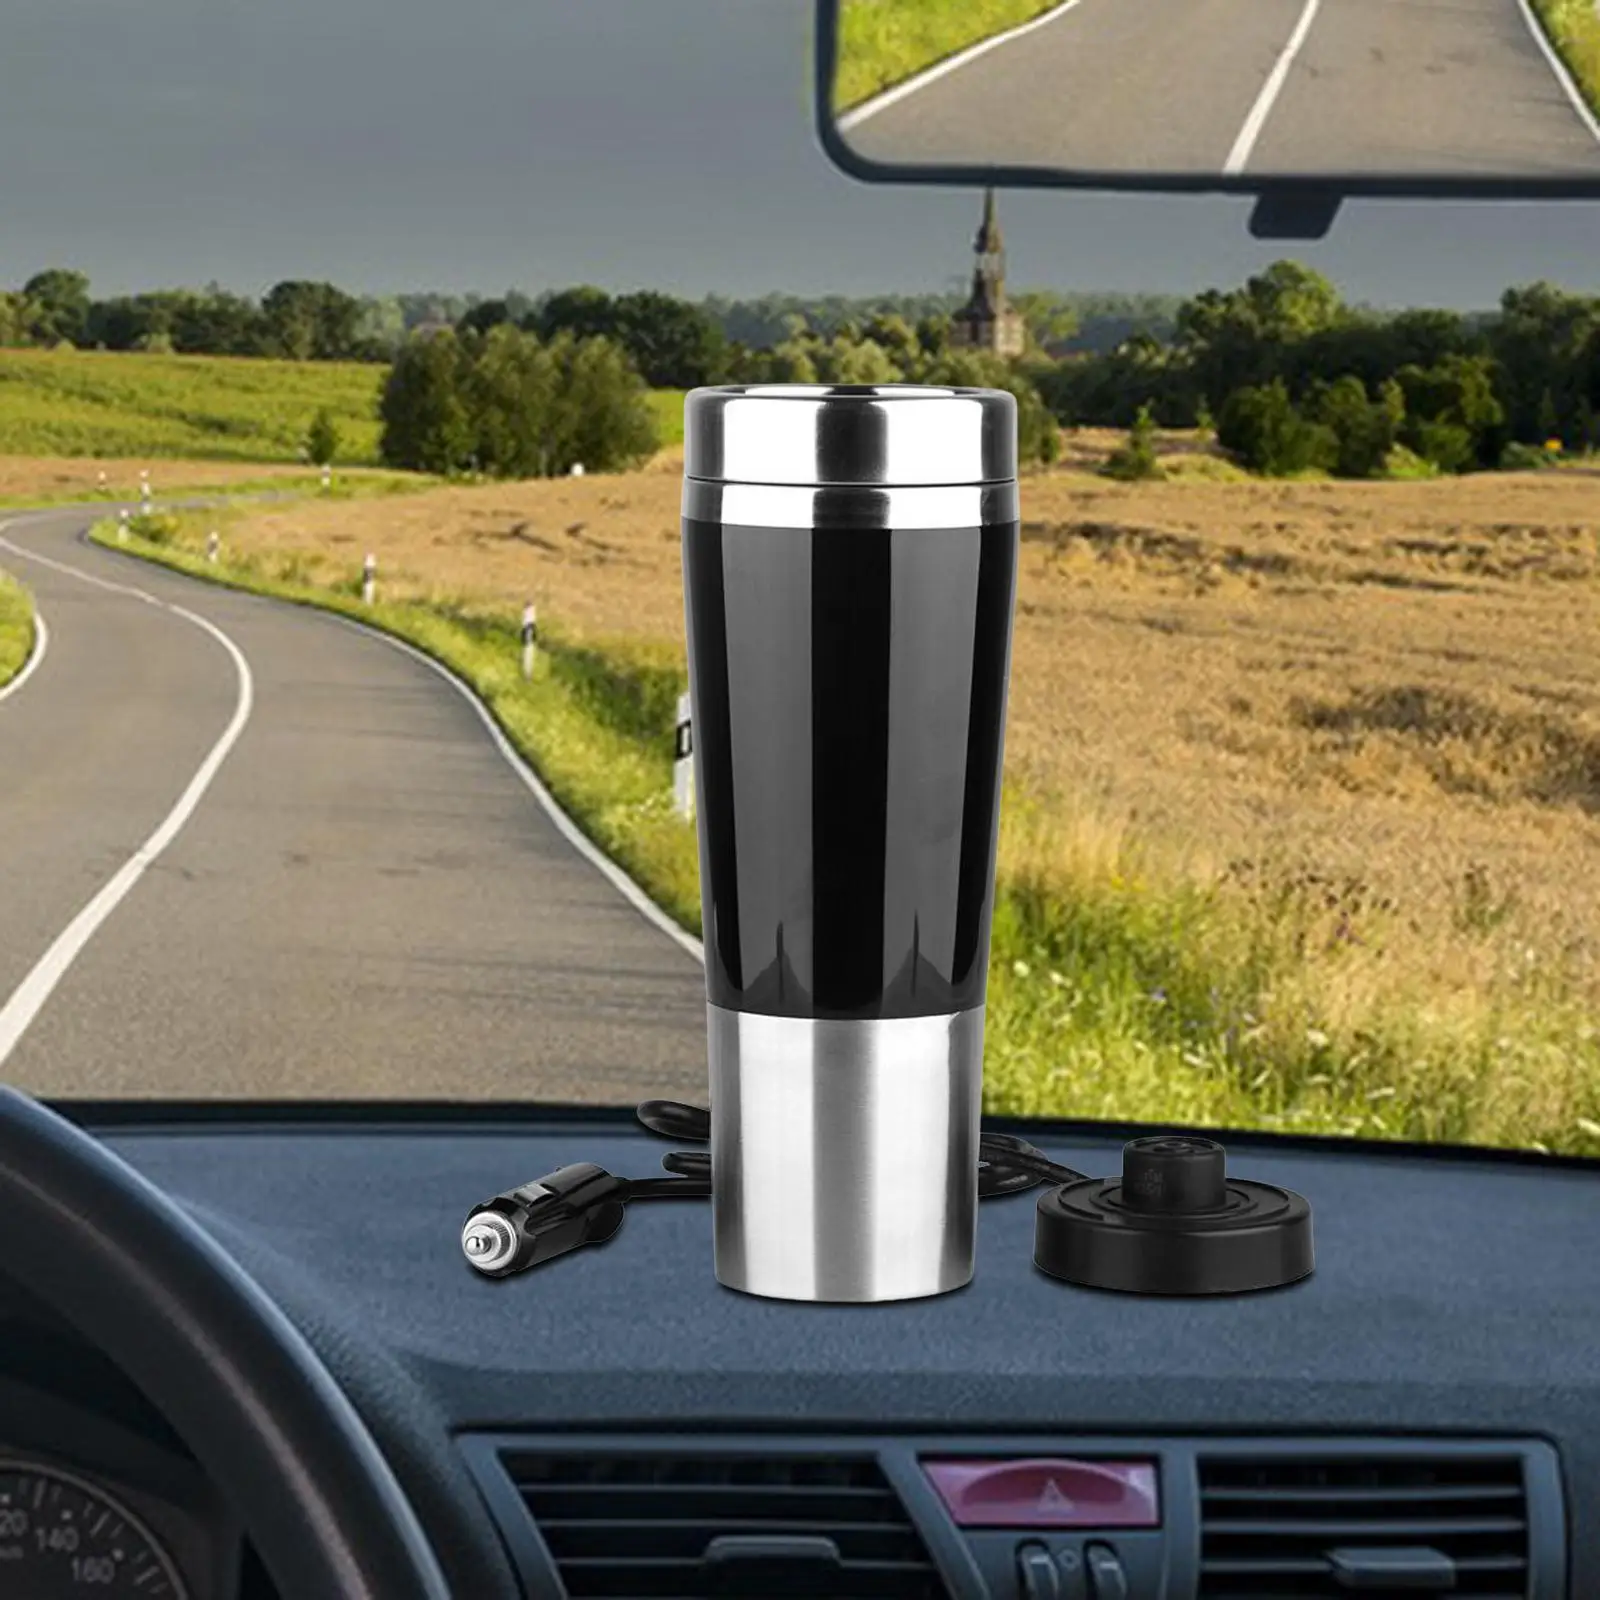 Portable 12V Car Kettle Boiler 450ml Heating Warmer Electric Insulated Cup Heater Cup for Tea Coffee Milk Travel Outdoor